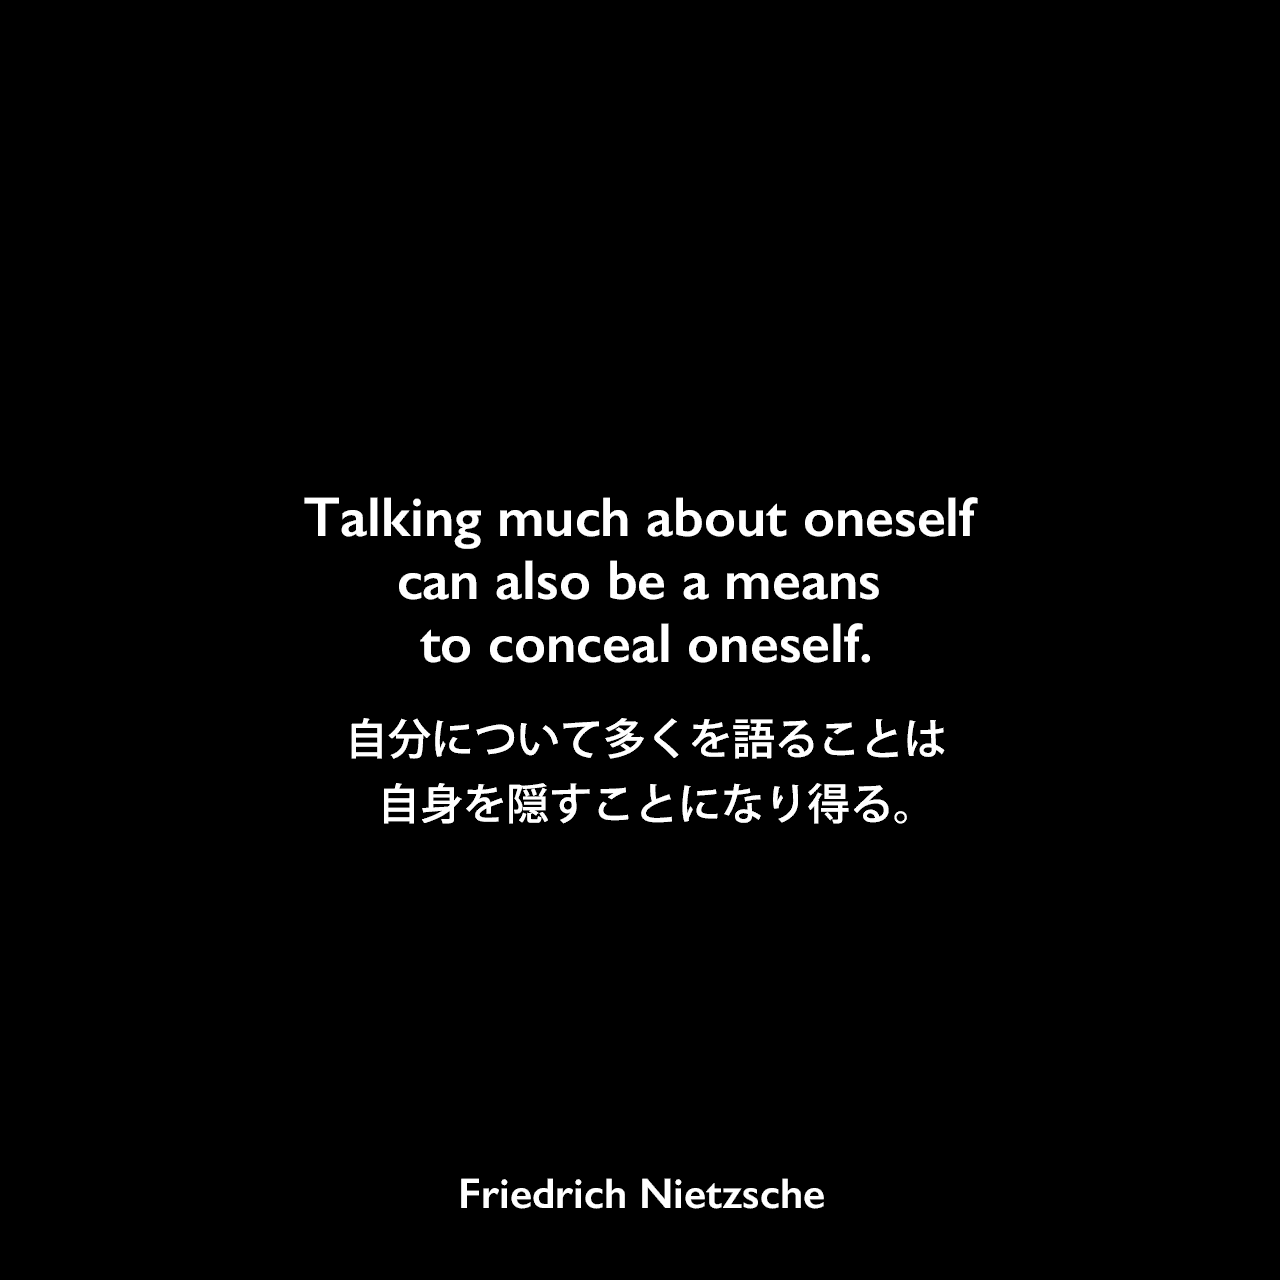 Talking much about oneself can also be a means to conceal oneself.自分について多くを語ることは、自身を隠すことになり得る。Friedrich Nietzsche